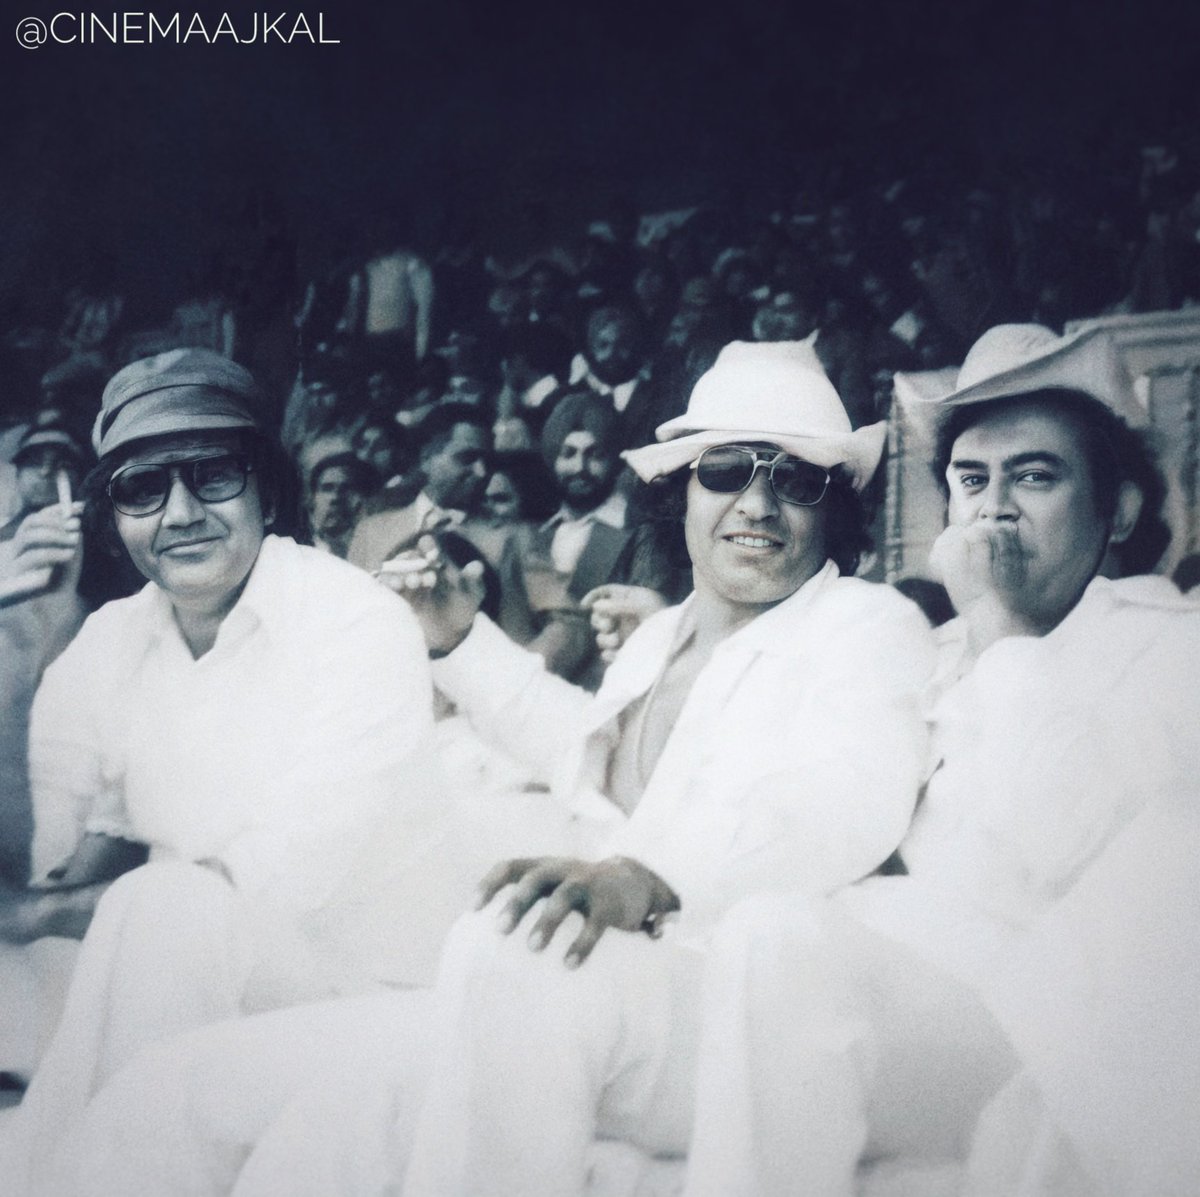 Ready for the big game! #IndVsAus 🇮🇳🇳🇿

Are you ready?

#PremChopra #Ranjeet #SanjeevKumar 

#TeamIndia 🇮🇳💫